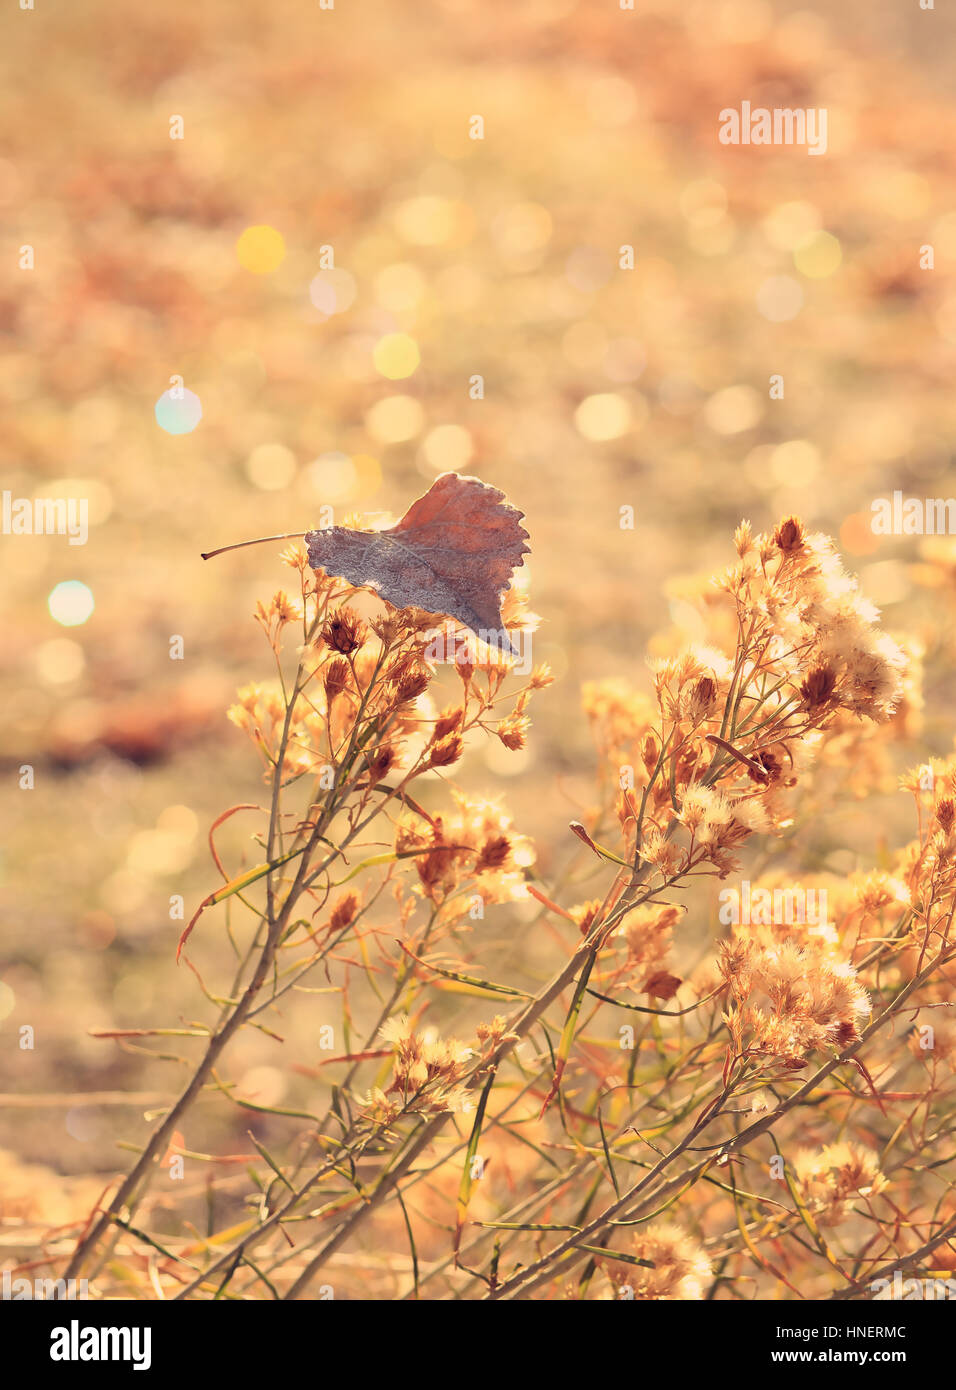 A single, frost-edged golden leaf rests on dried flowers against a sparkly gold background. It is autumnal in feel and subject matter. Stock Photo